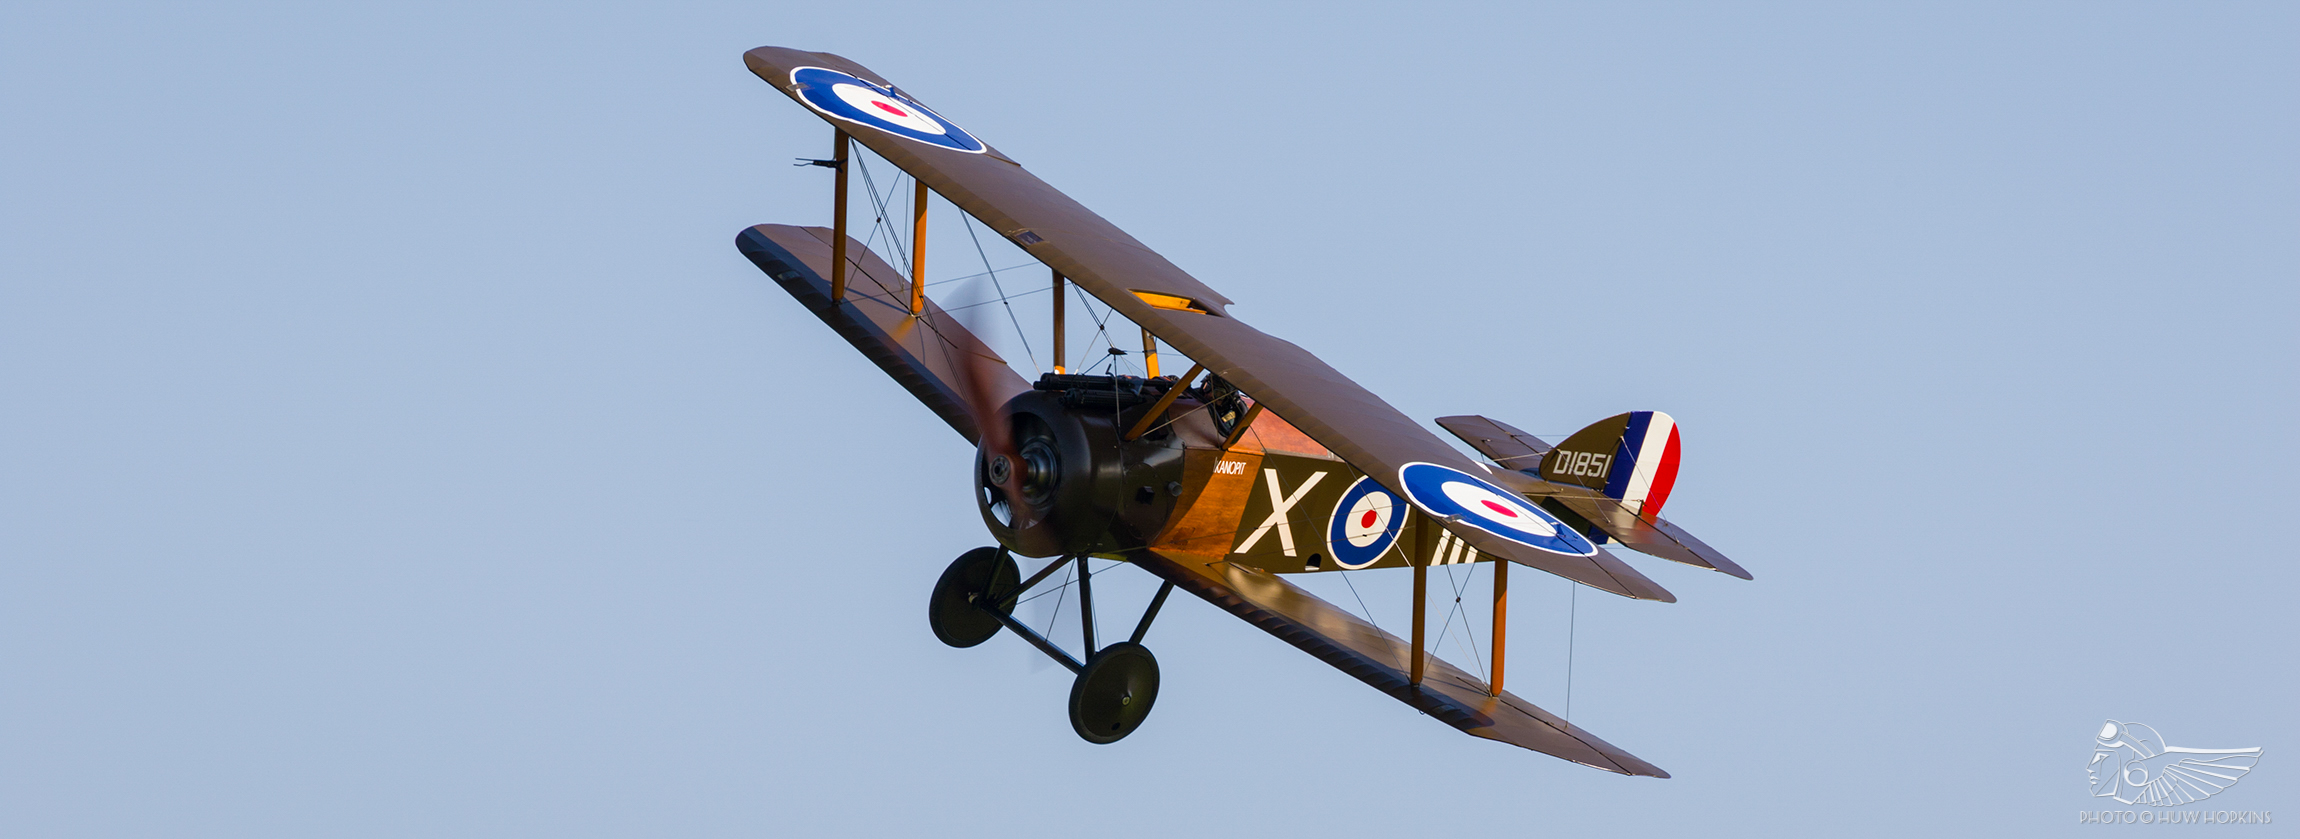 Test flying The Shuttleworth Collection’s Sopwith Camel F.1